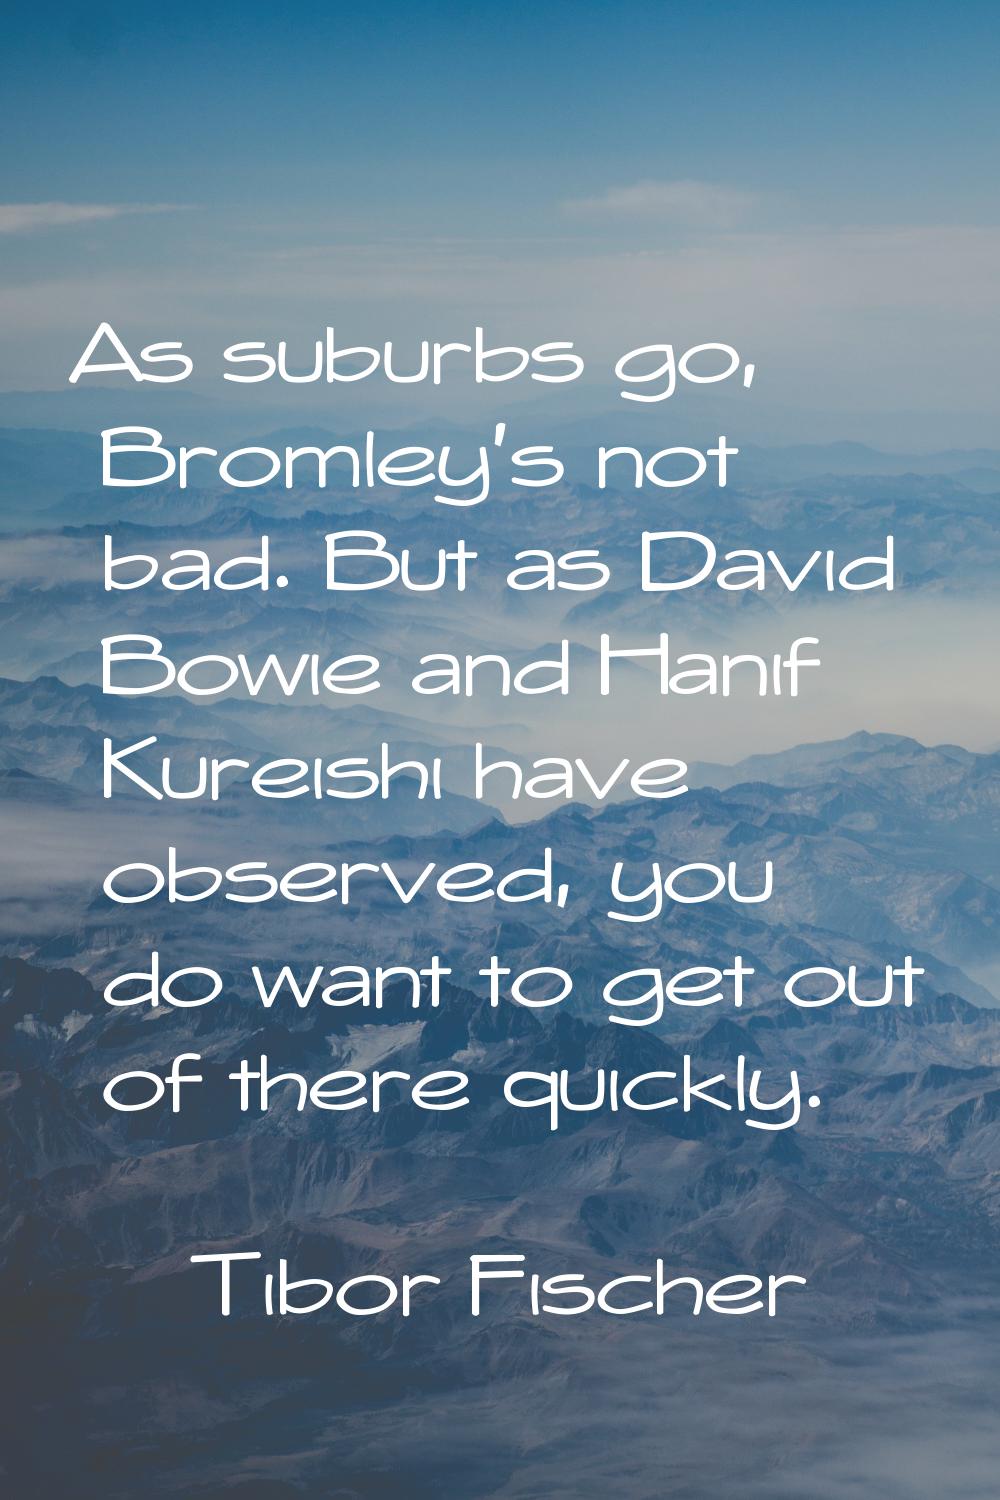 As suburbs go, Bromley's not bad. But as David Bowie and Hanif Kureishi have observed, you do want 